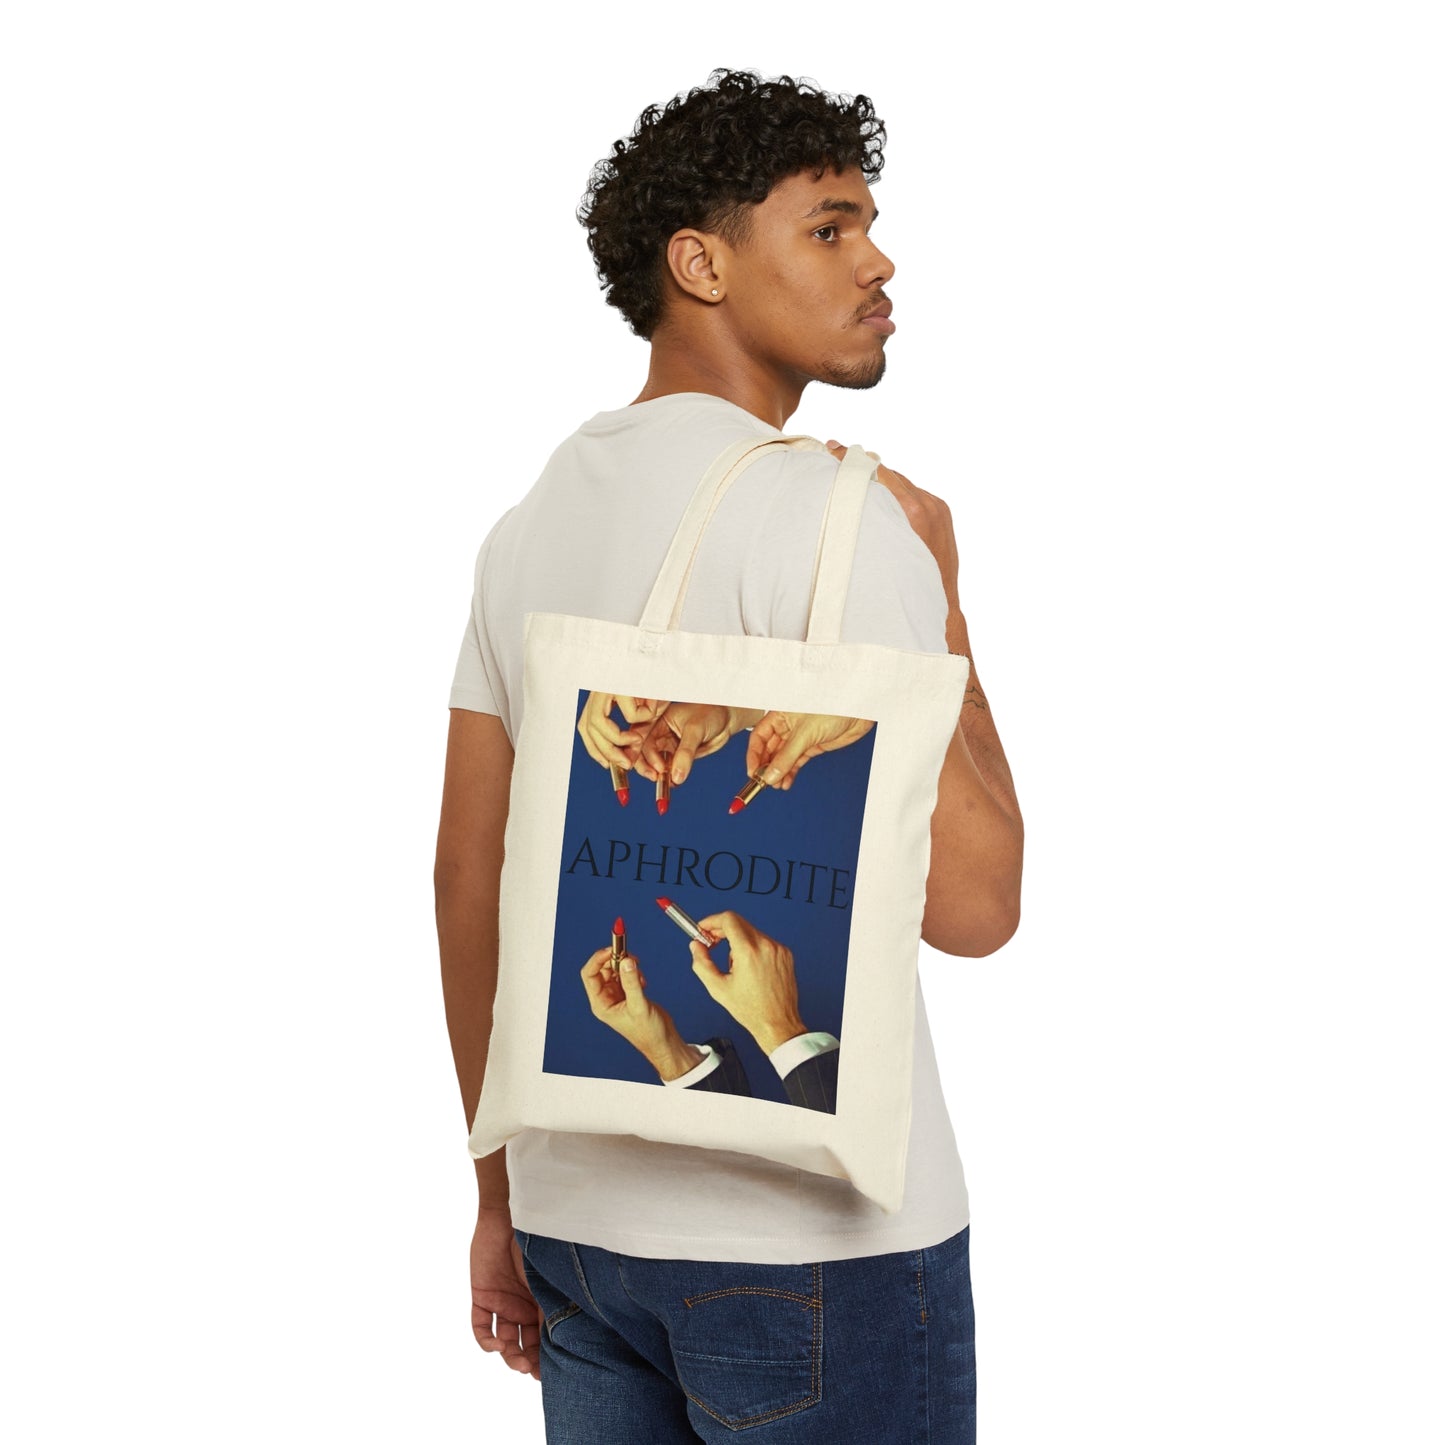 “The Pinnacle of Desire” Cotton Canvas Tote